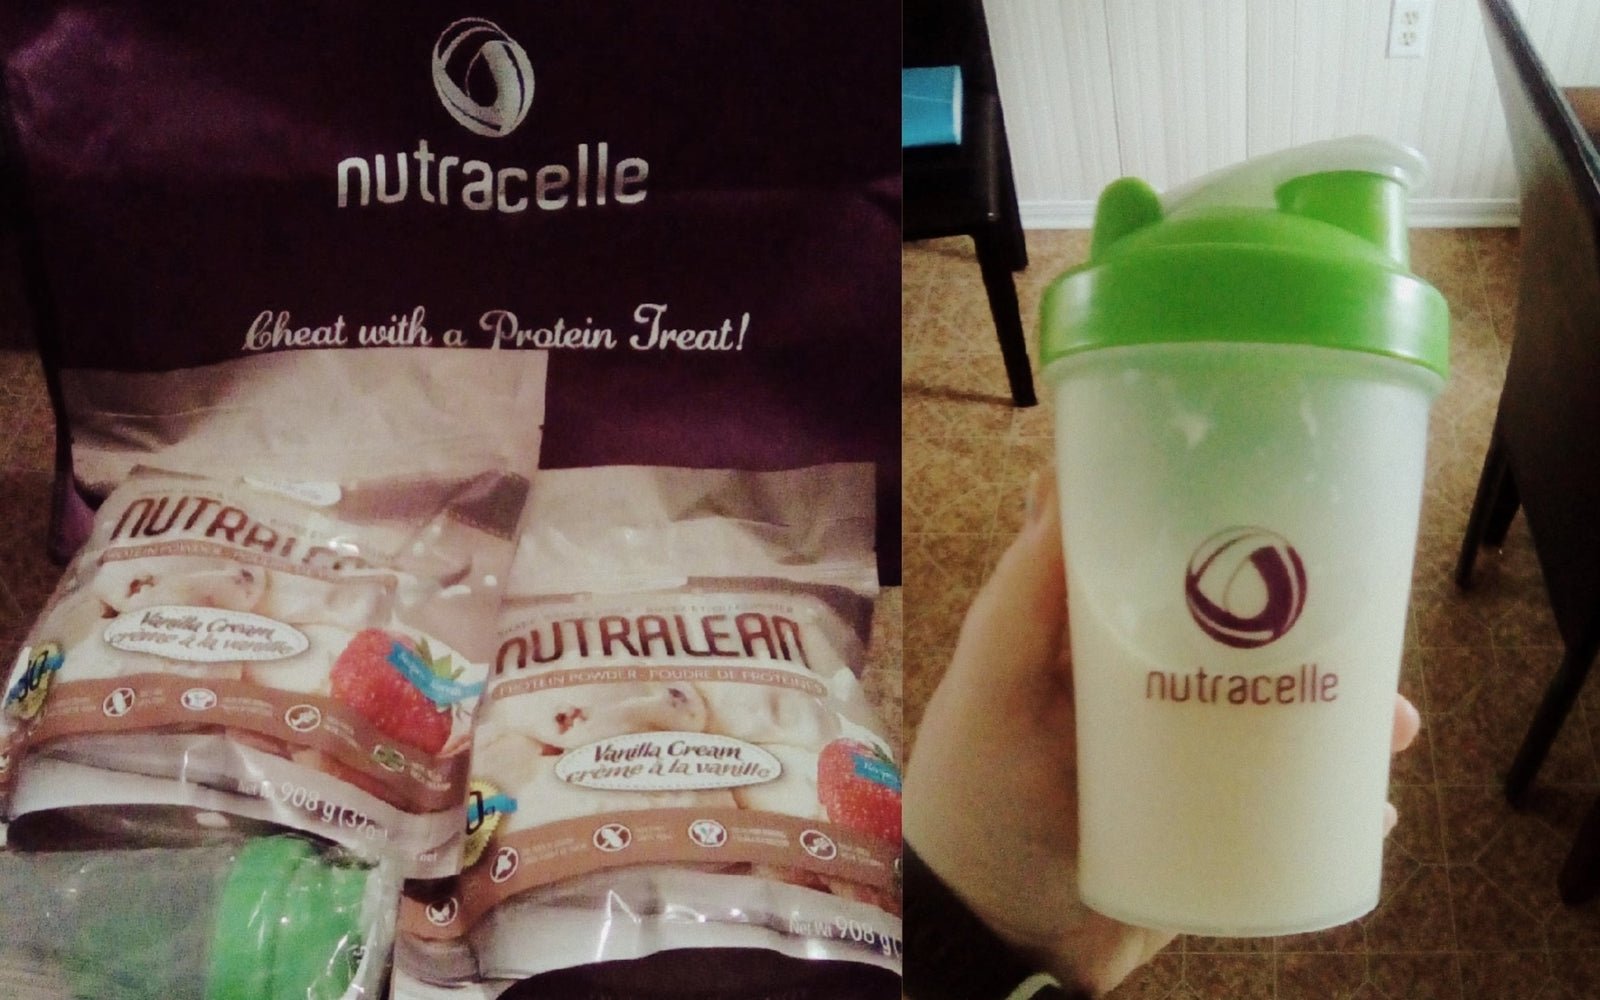 Top 5 Steps To Do BEFORE You Receive Your Order - Nutracelle